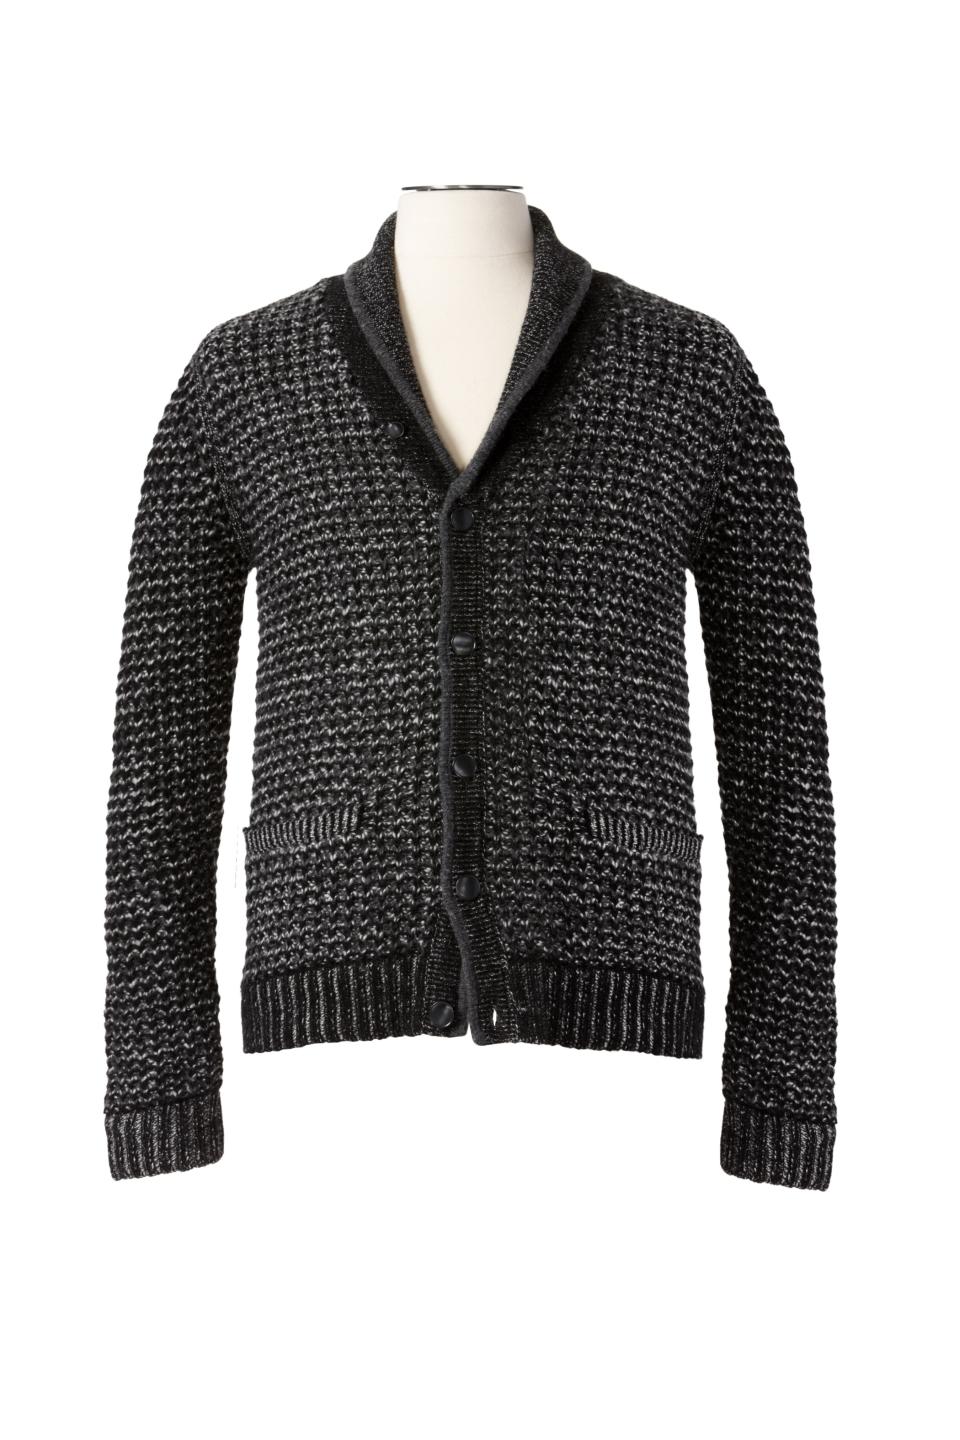 <b>rag & bone for Target + Neiman Marcus Holiday Collection Boy’s and Men’s Sweater </b><br><br> Men’s Sweater Price: $69.99, Size: S – XL <br><br> Boy’s Sweater Price: $49.99, Size: S – XL <br><br>